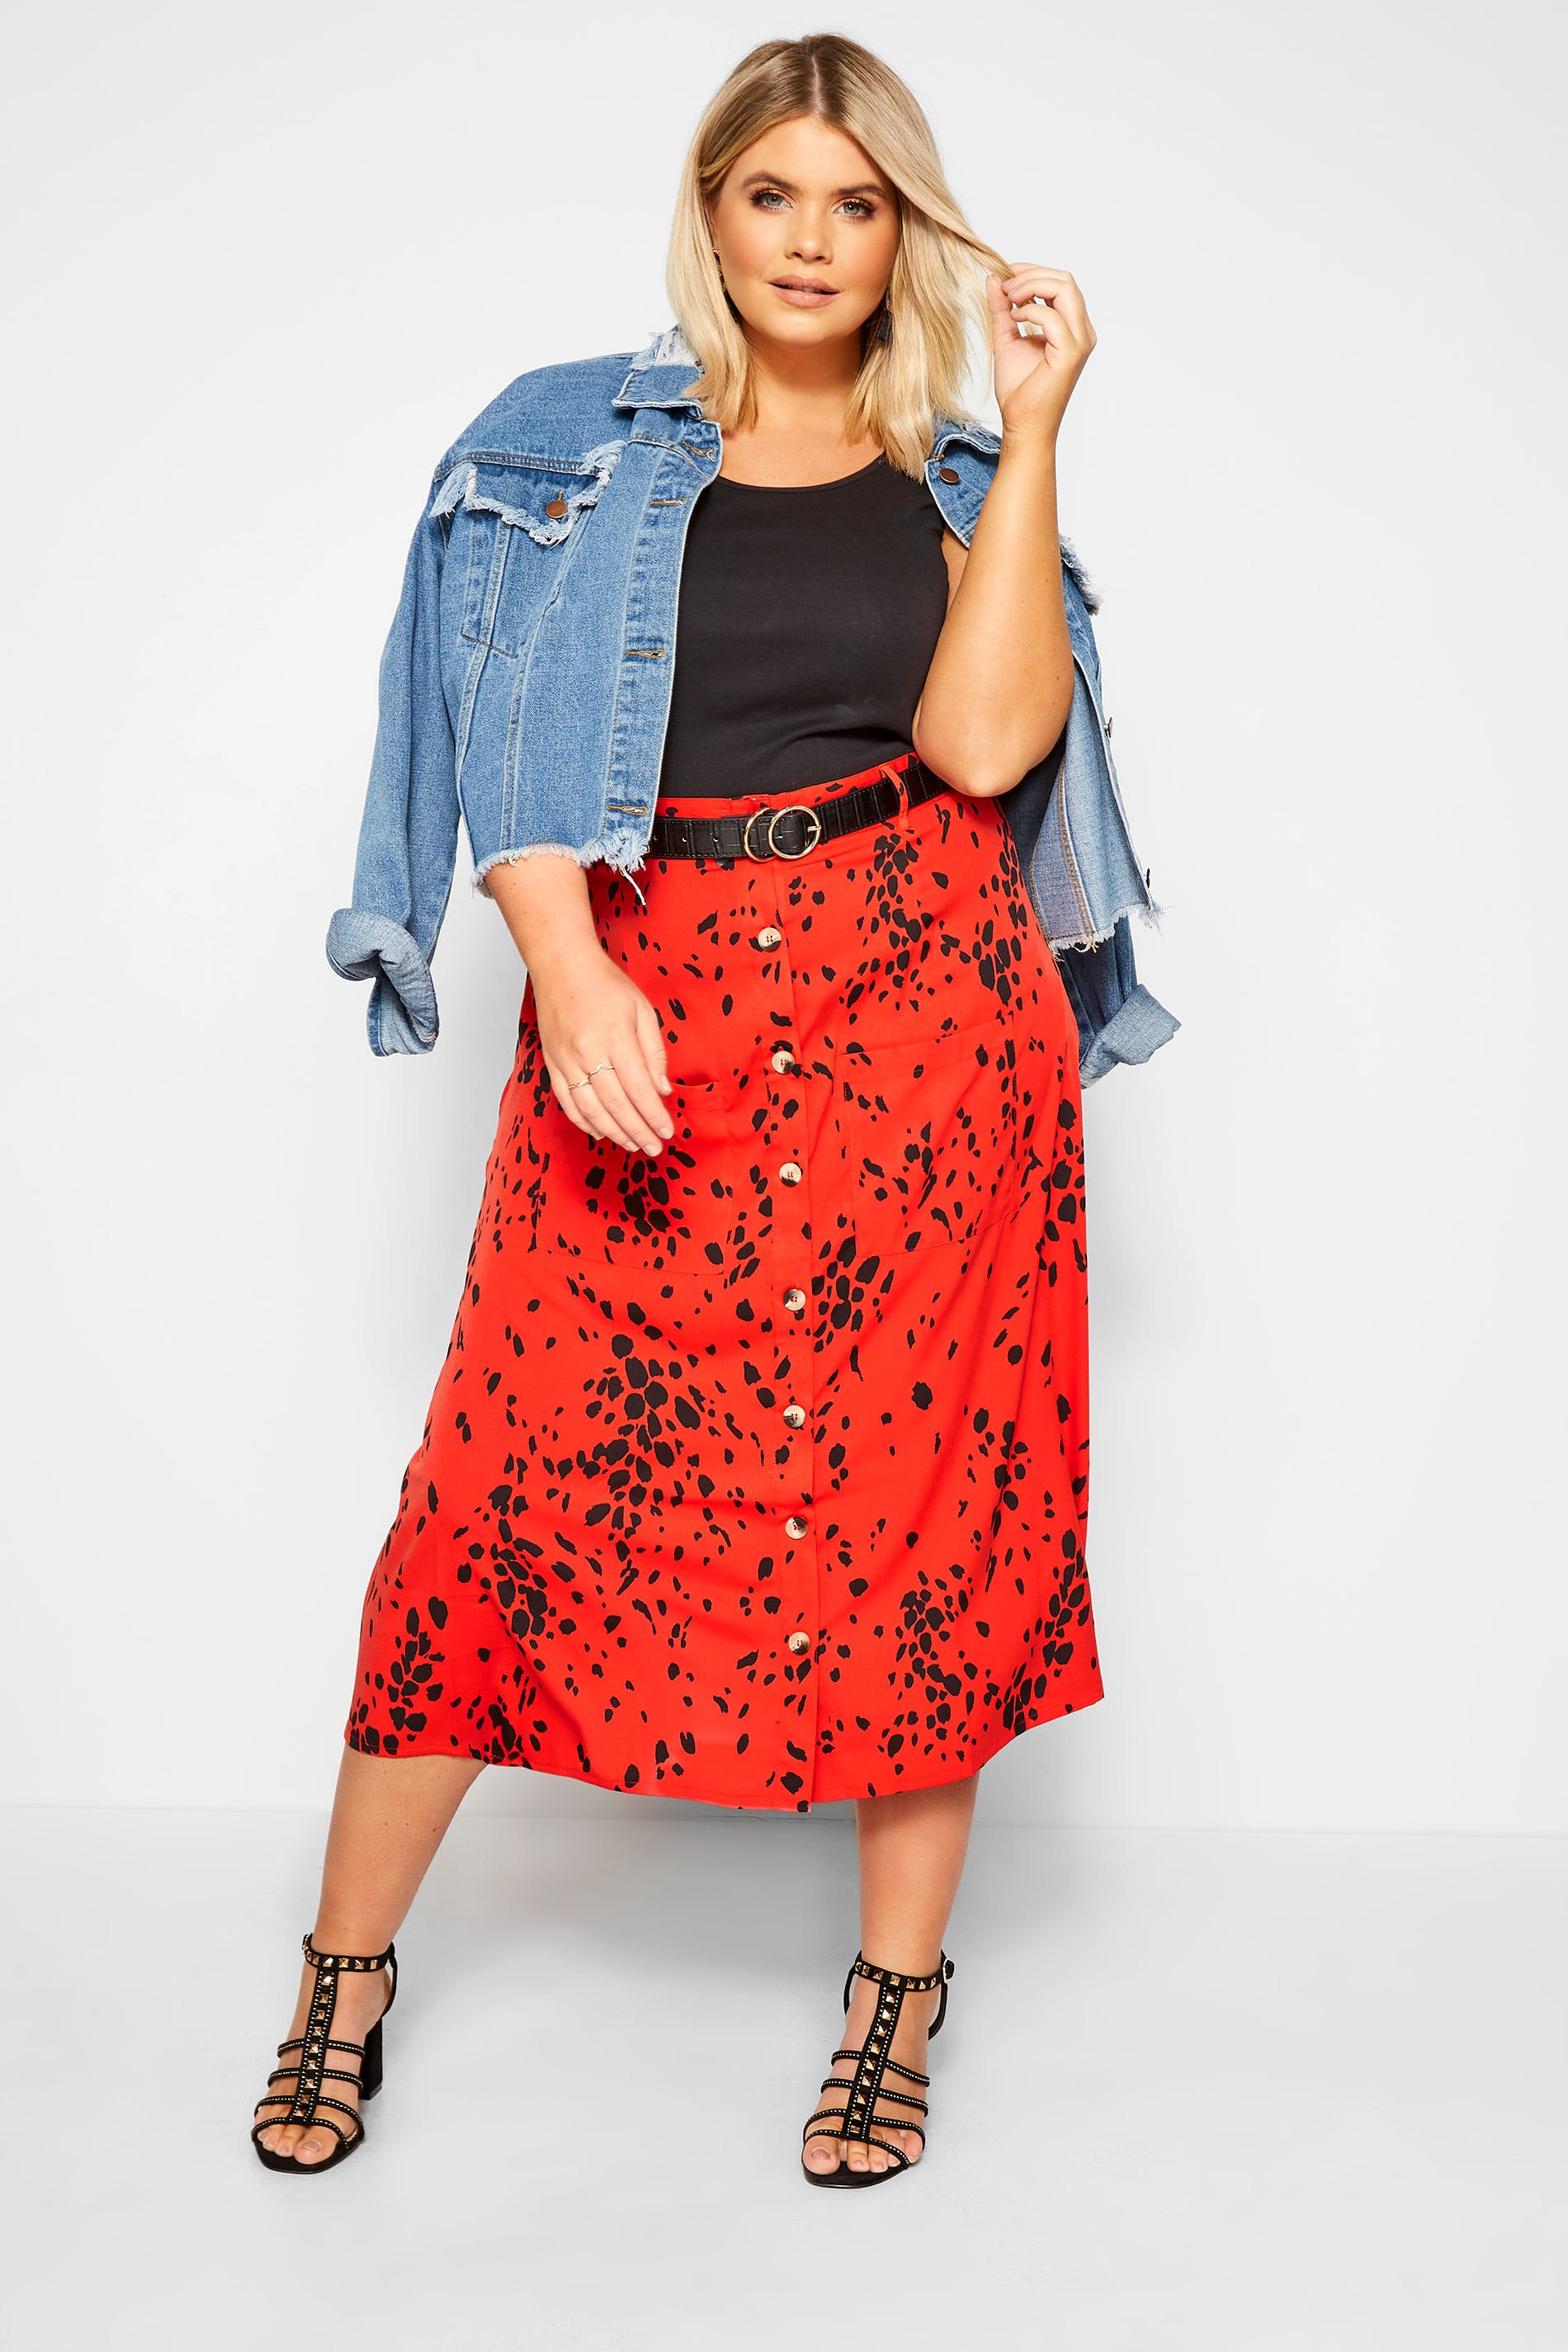 WEDNESDAY'S GIRL Red Spotted Maxi Skirt | Yours Clothing